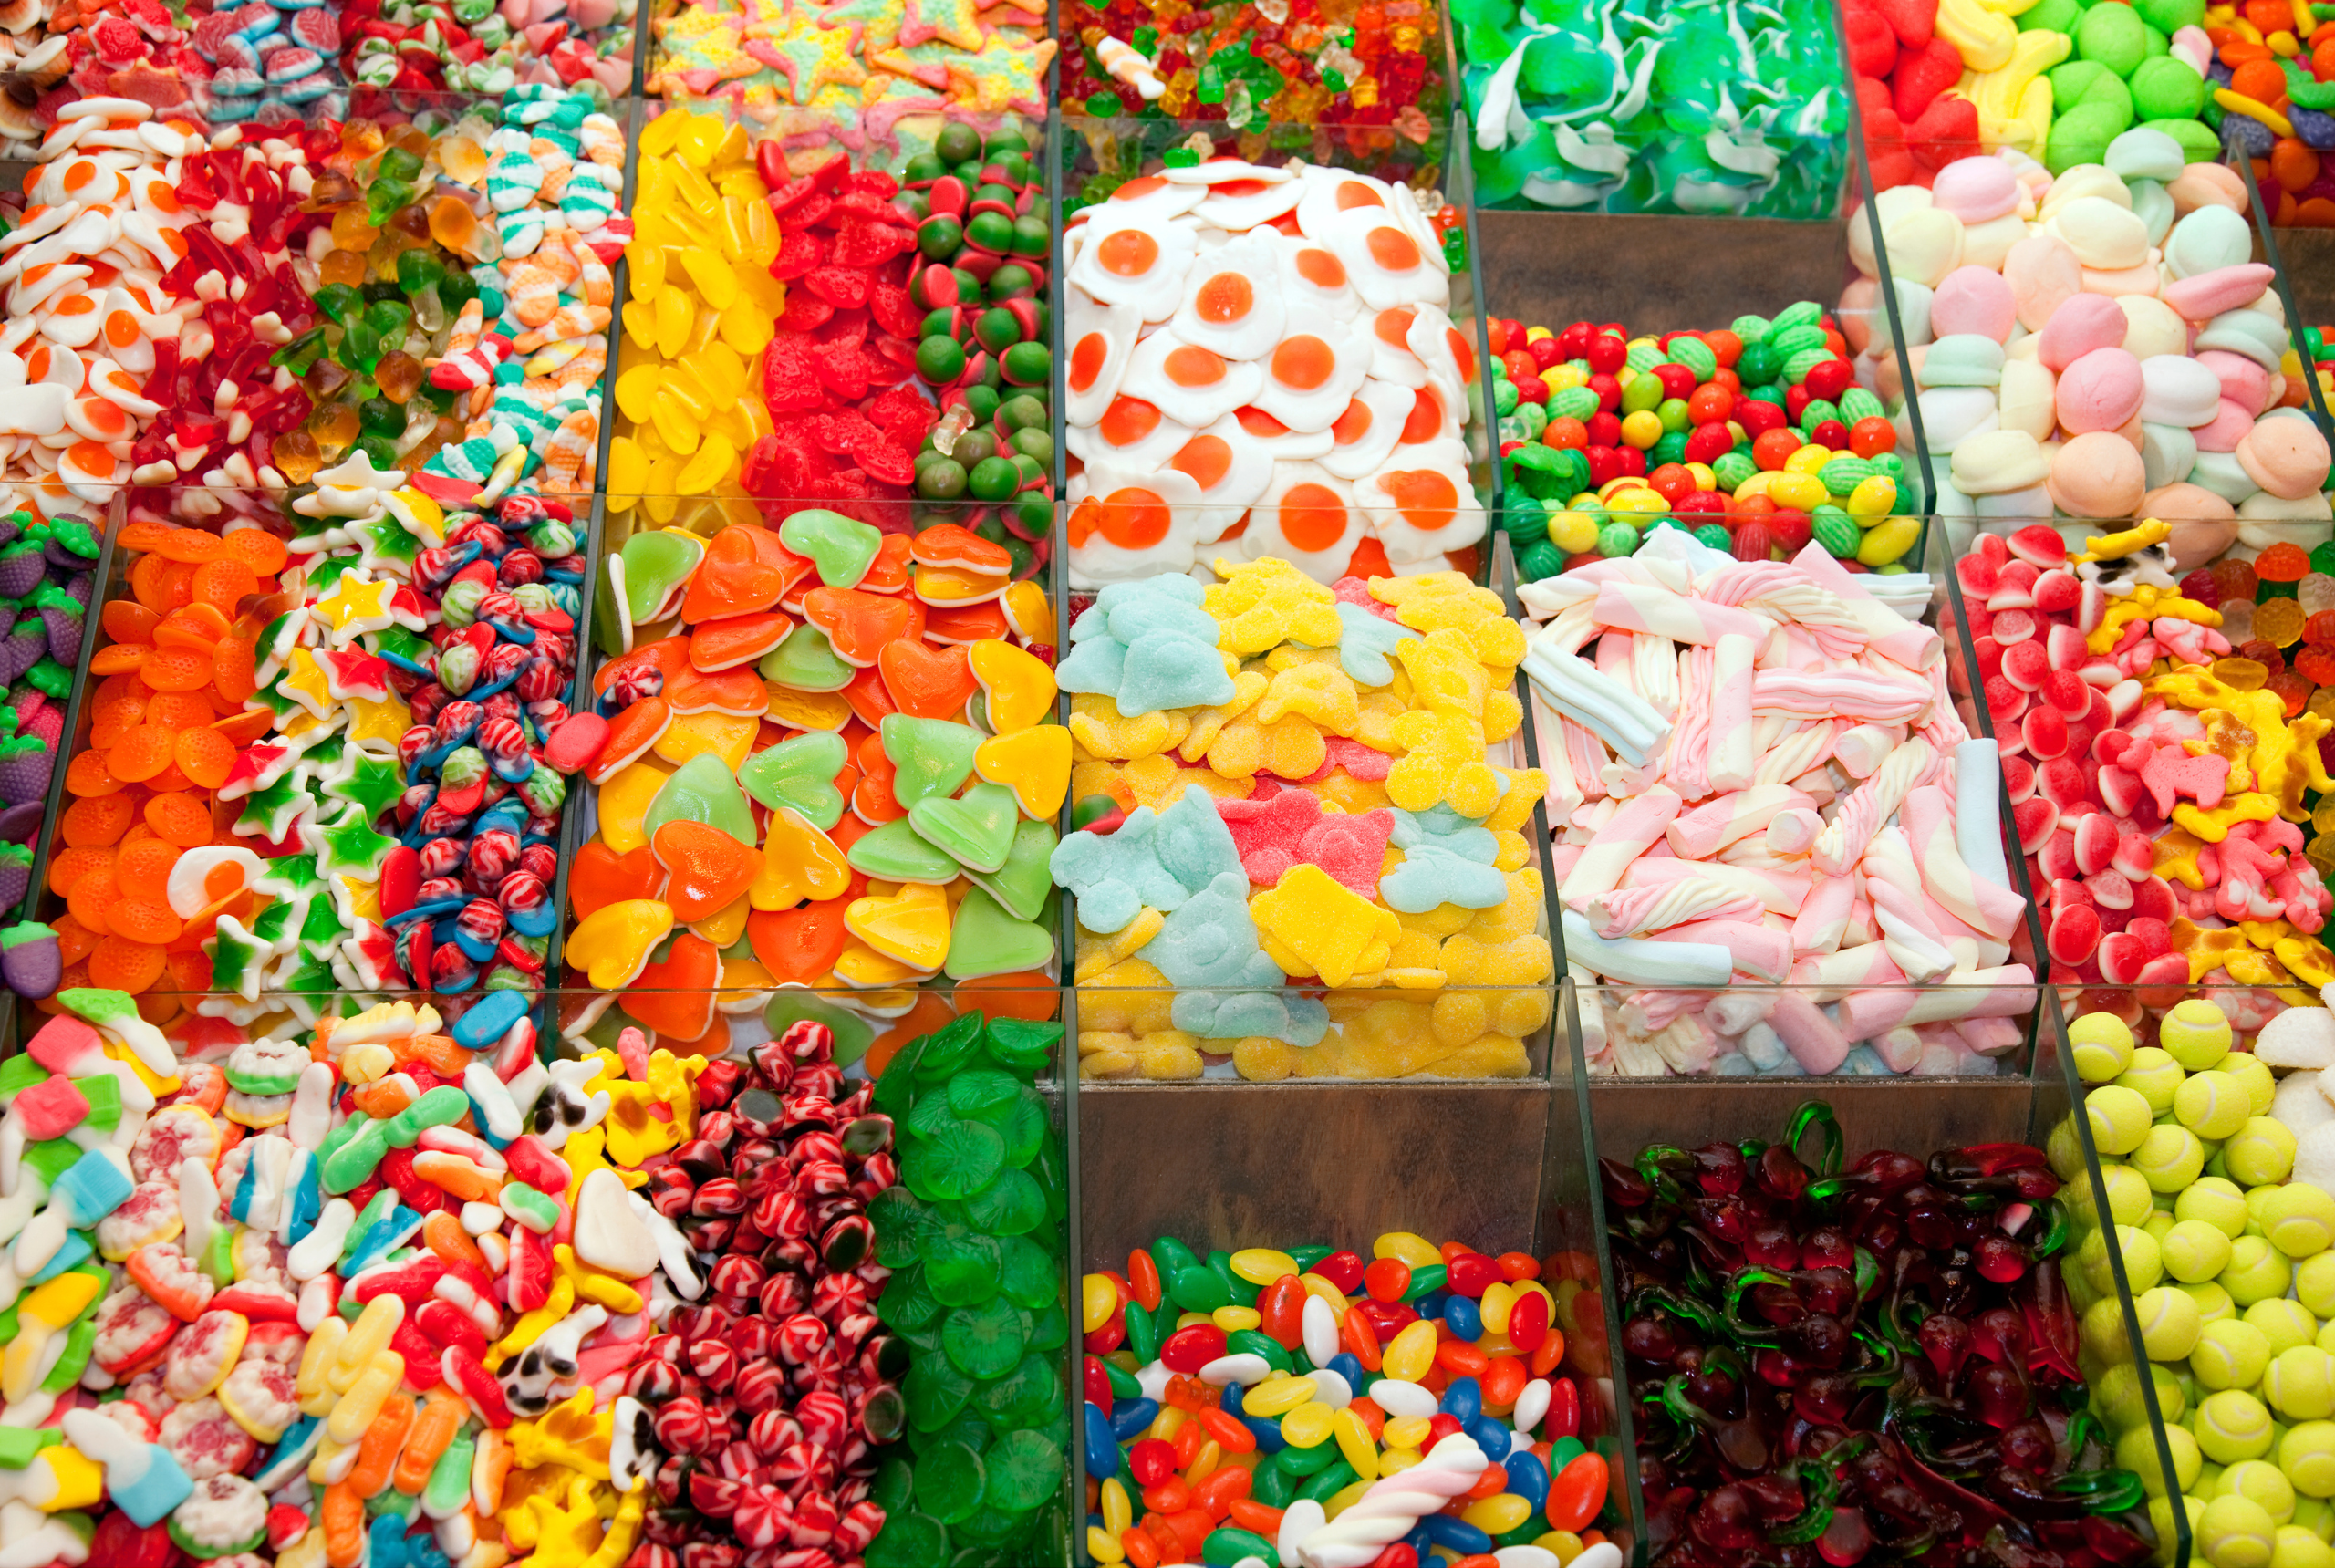 Bins of different colored candy, separated by candy type